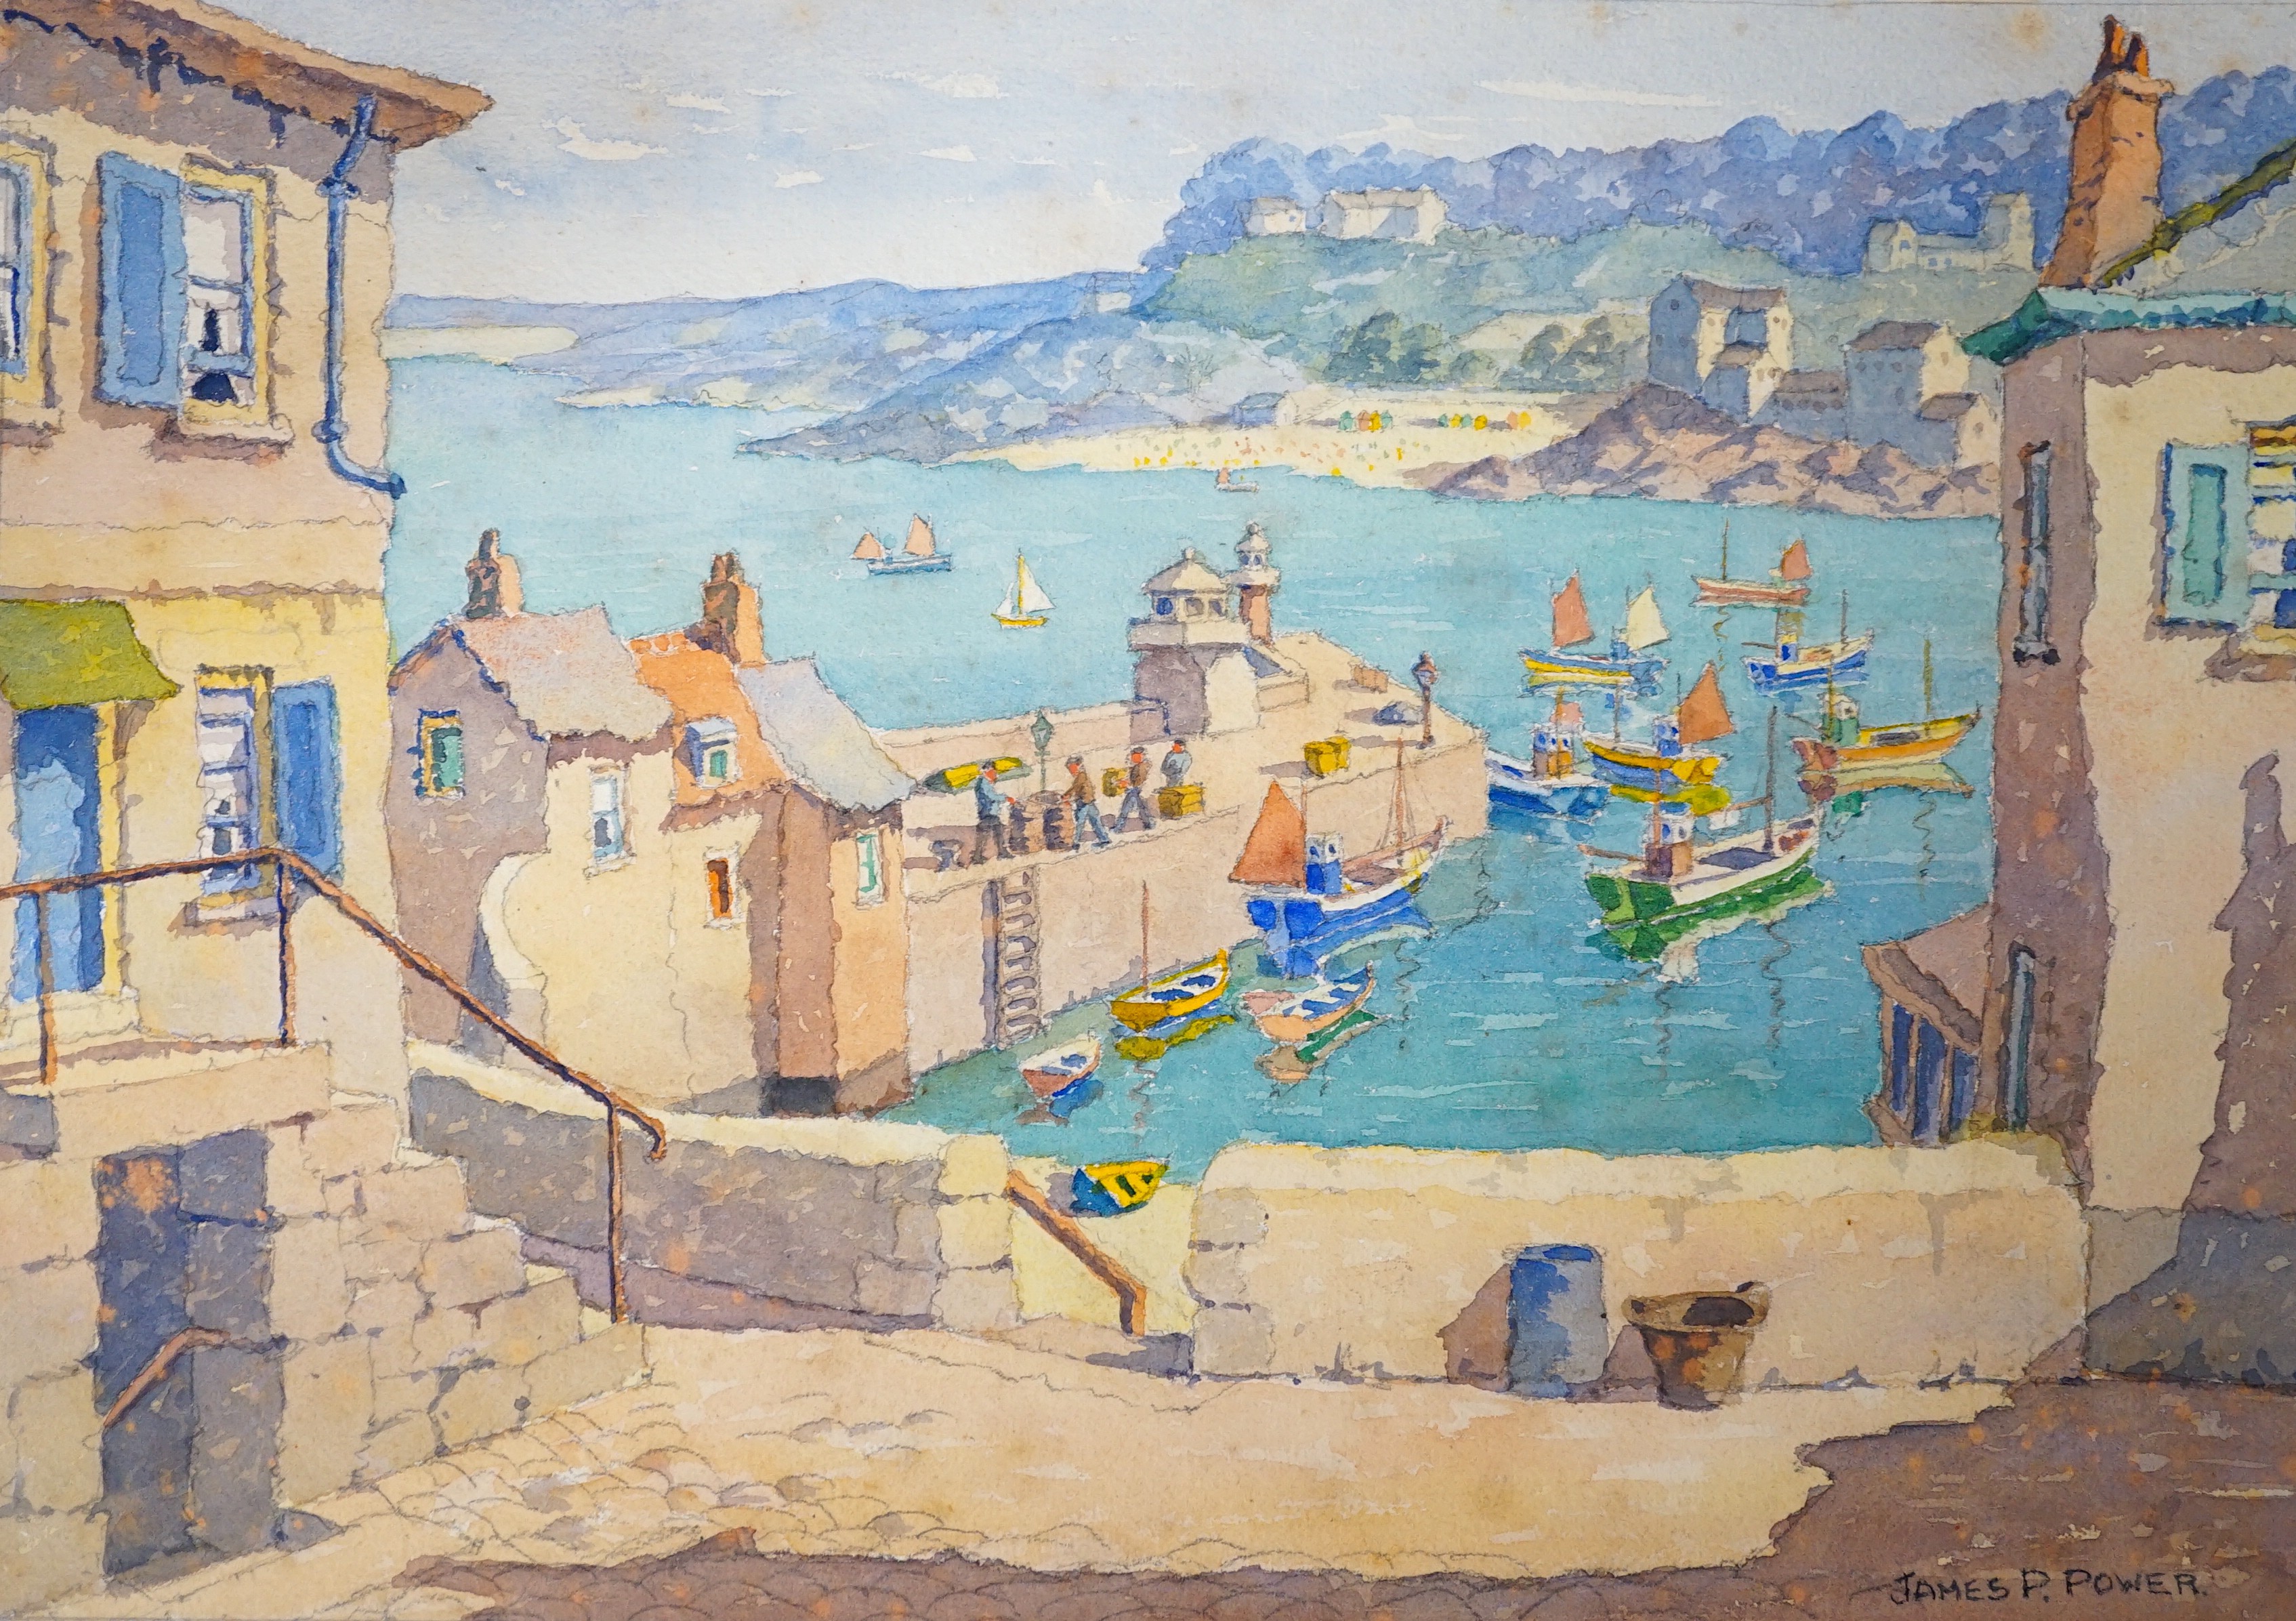 James P. Power R.B.A.(Exh.1924-1938), watercolour, 'The Harbour, St Ives, Cornwall' and a watercolour of 'Old Harry Rocks, Dorset' by John Christopher Temple Willis, largest 25 x 35cm, unframed